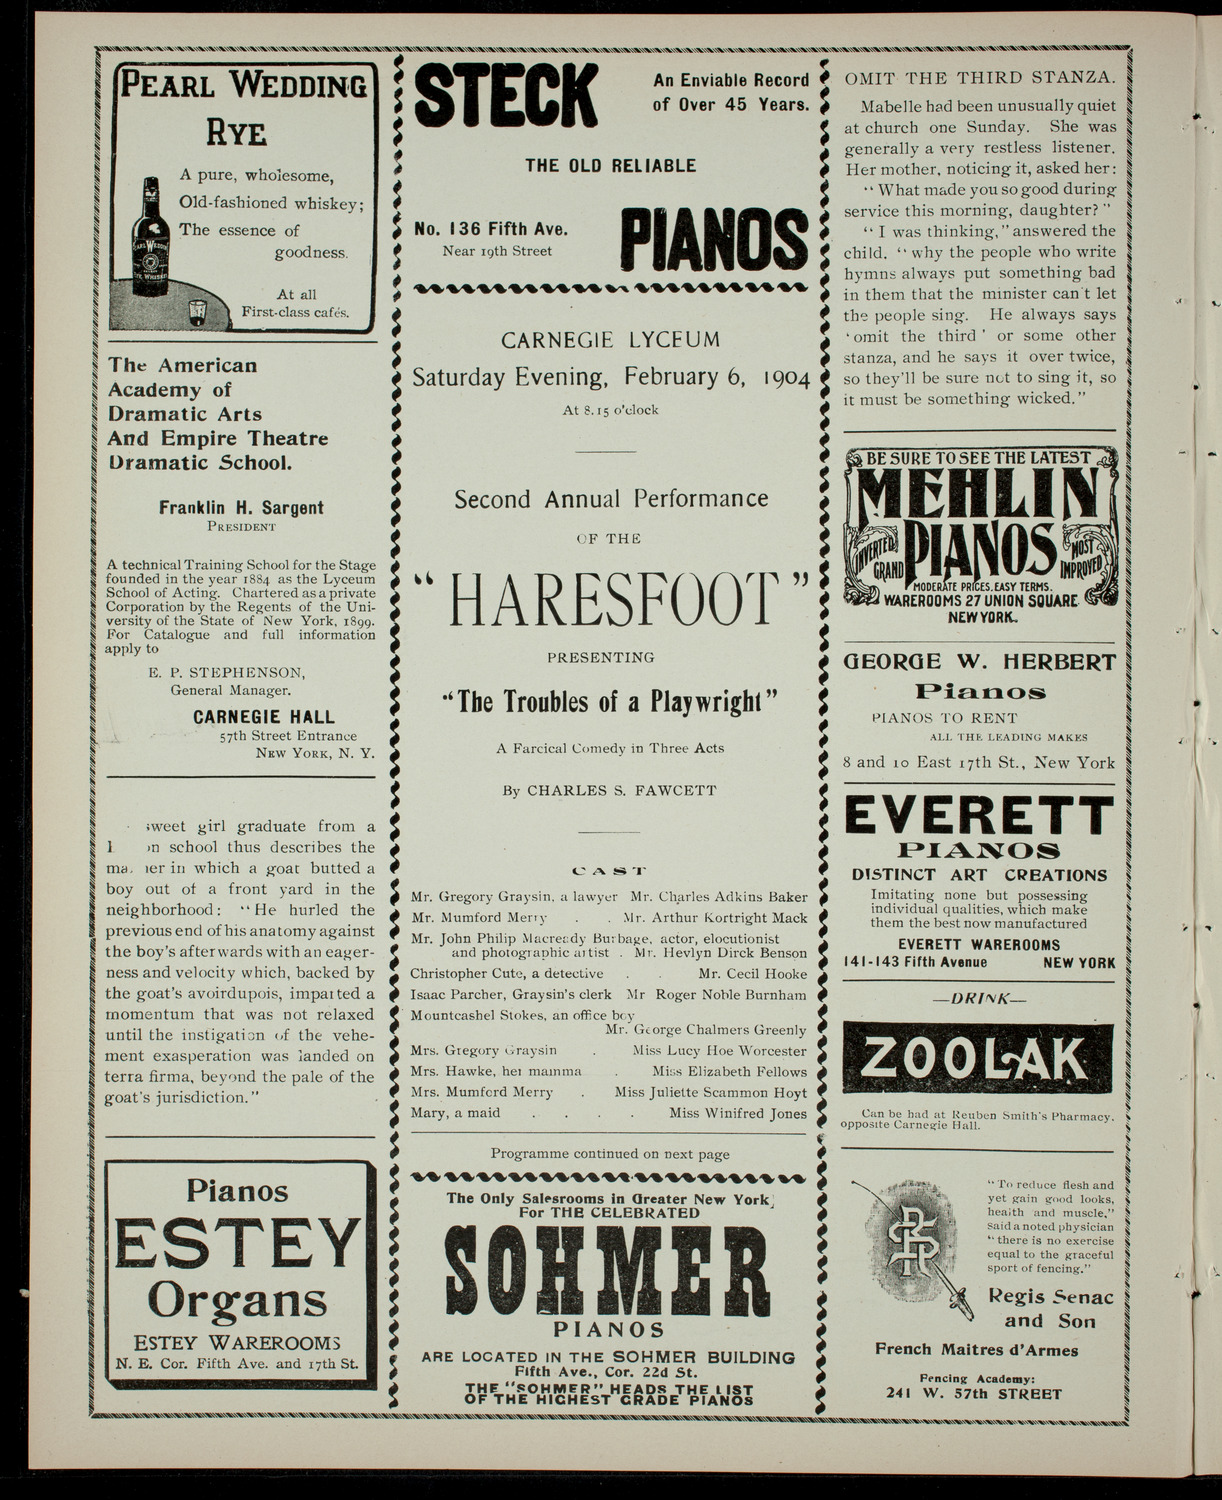 The Haresfoot Club Theatre Group, February 6, 1904, program page 2